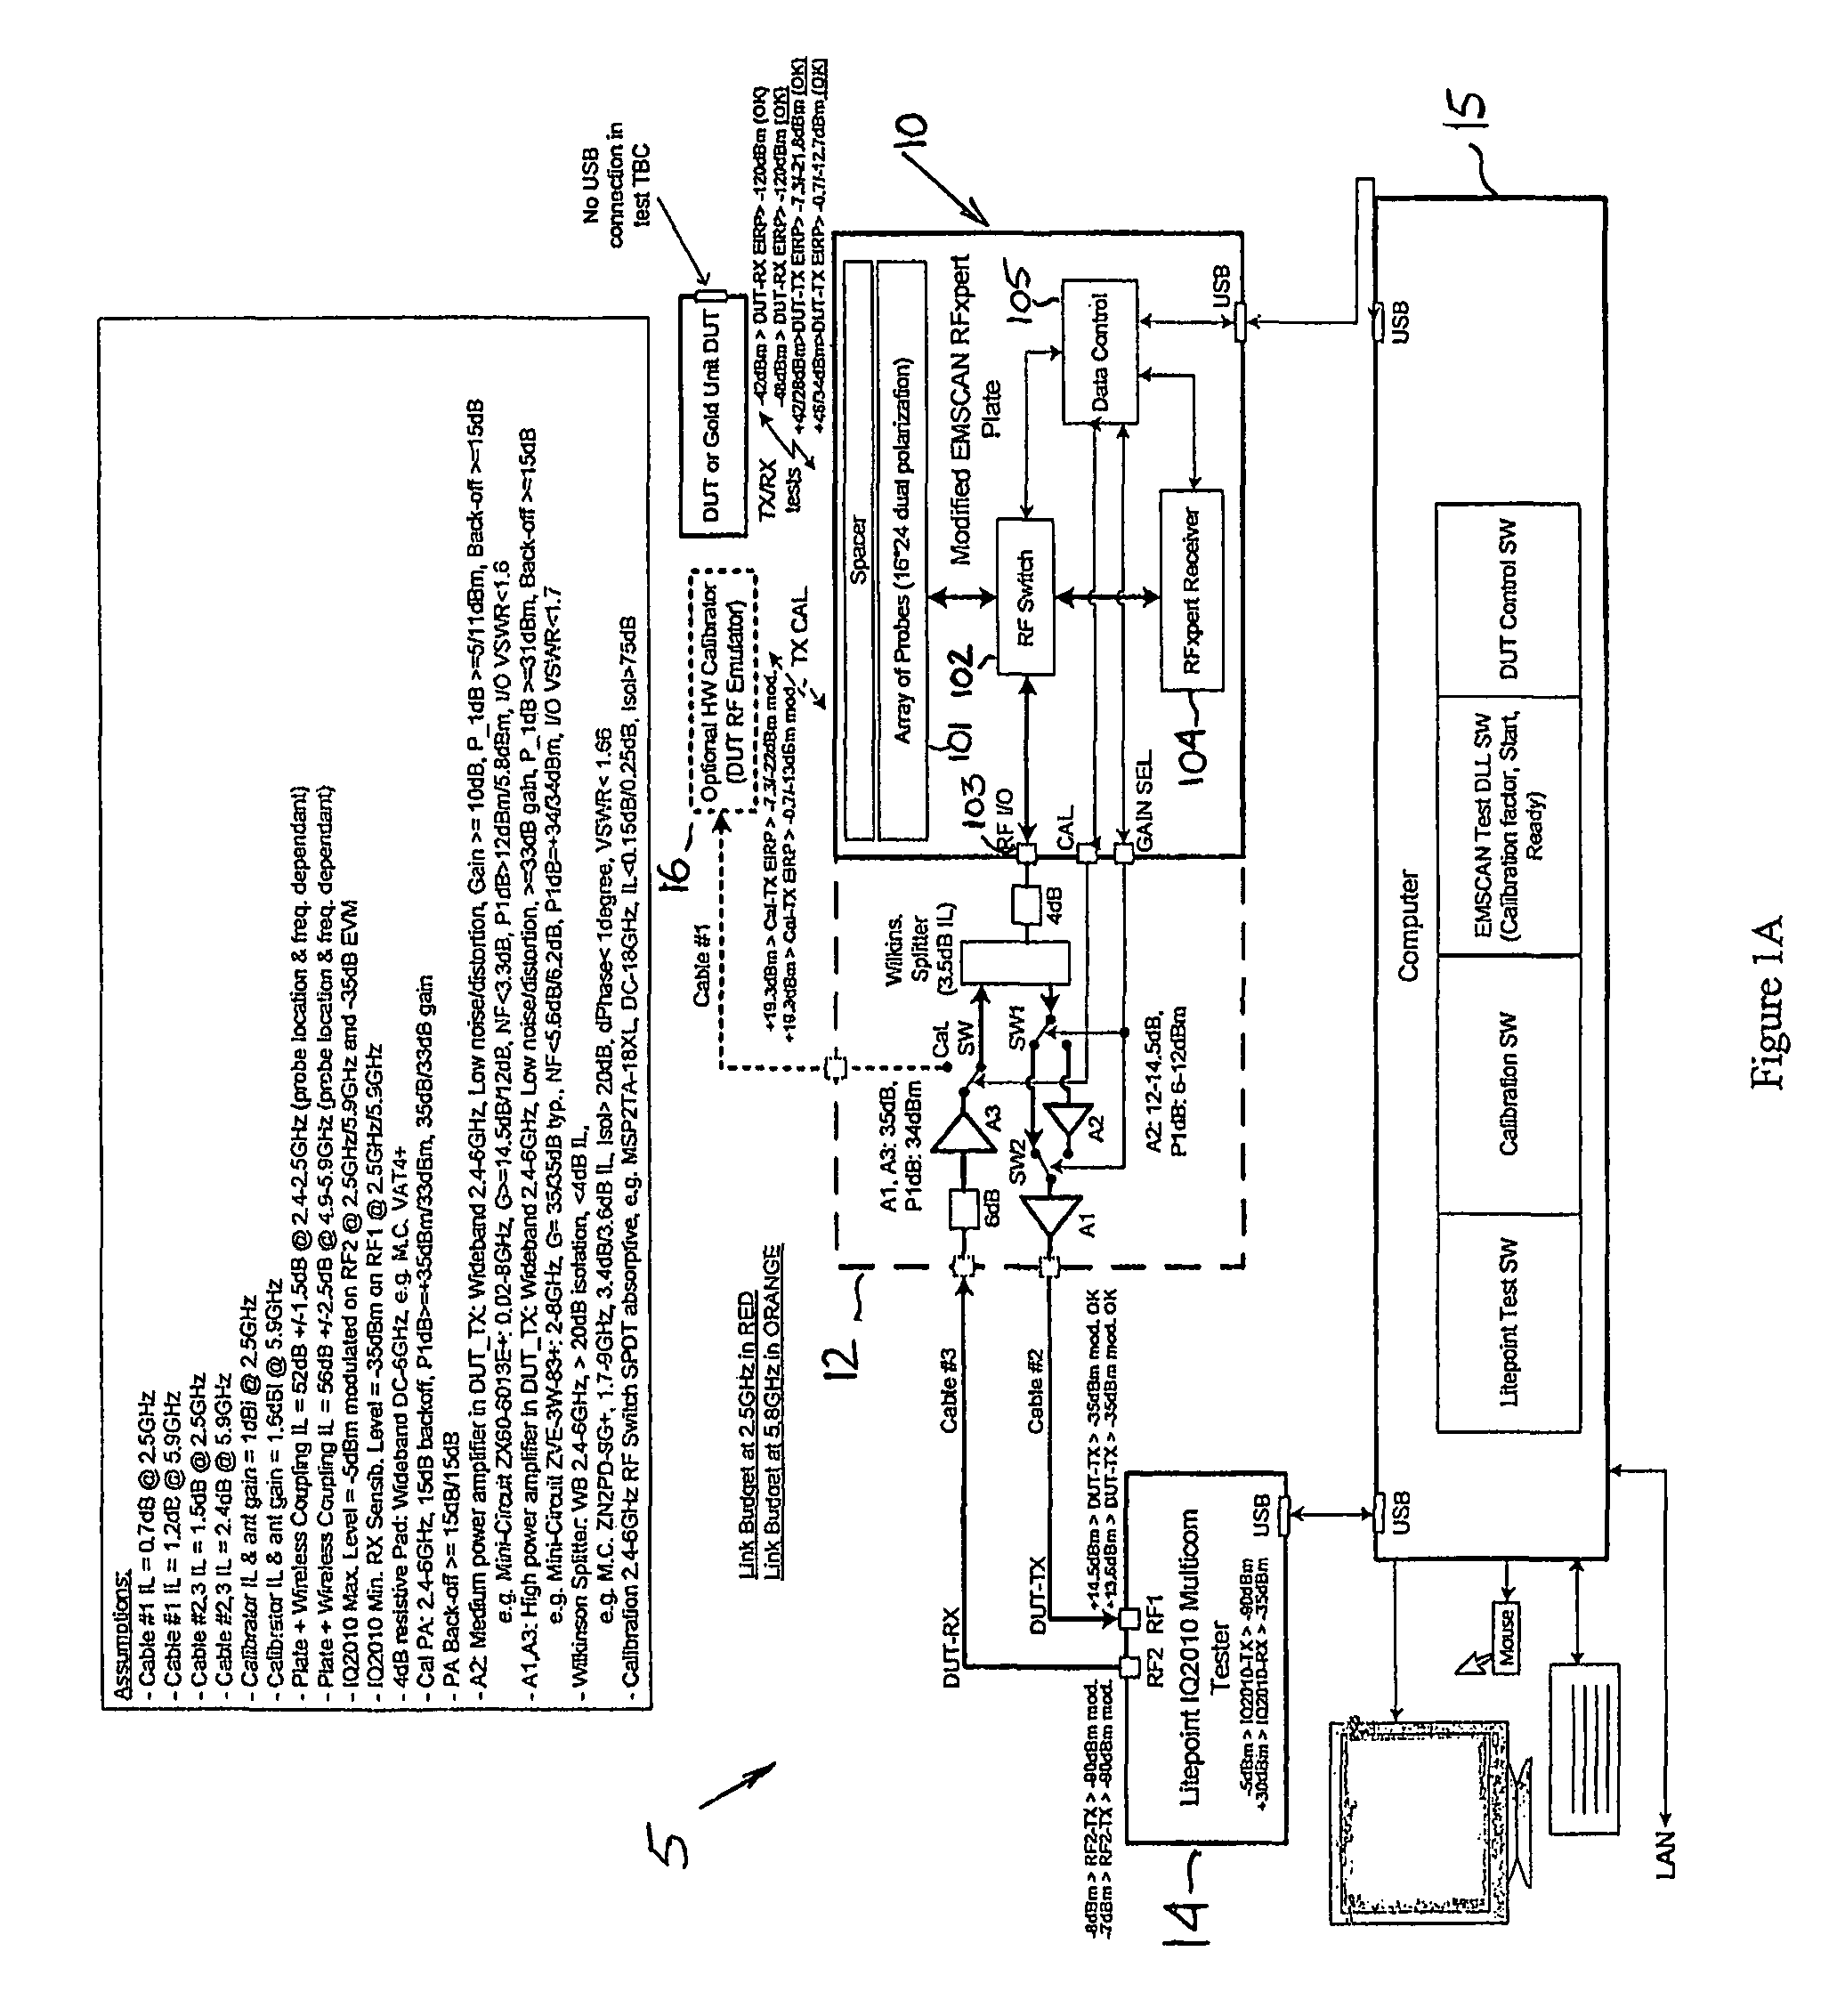 Test station for wireless devices and methods for calibration thereof